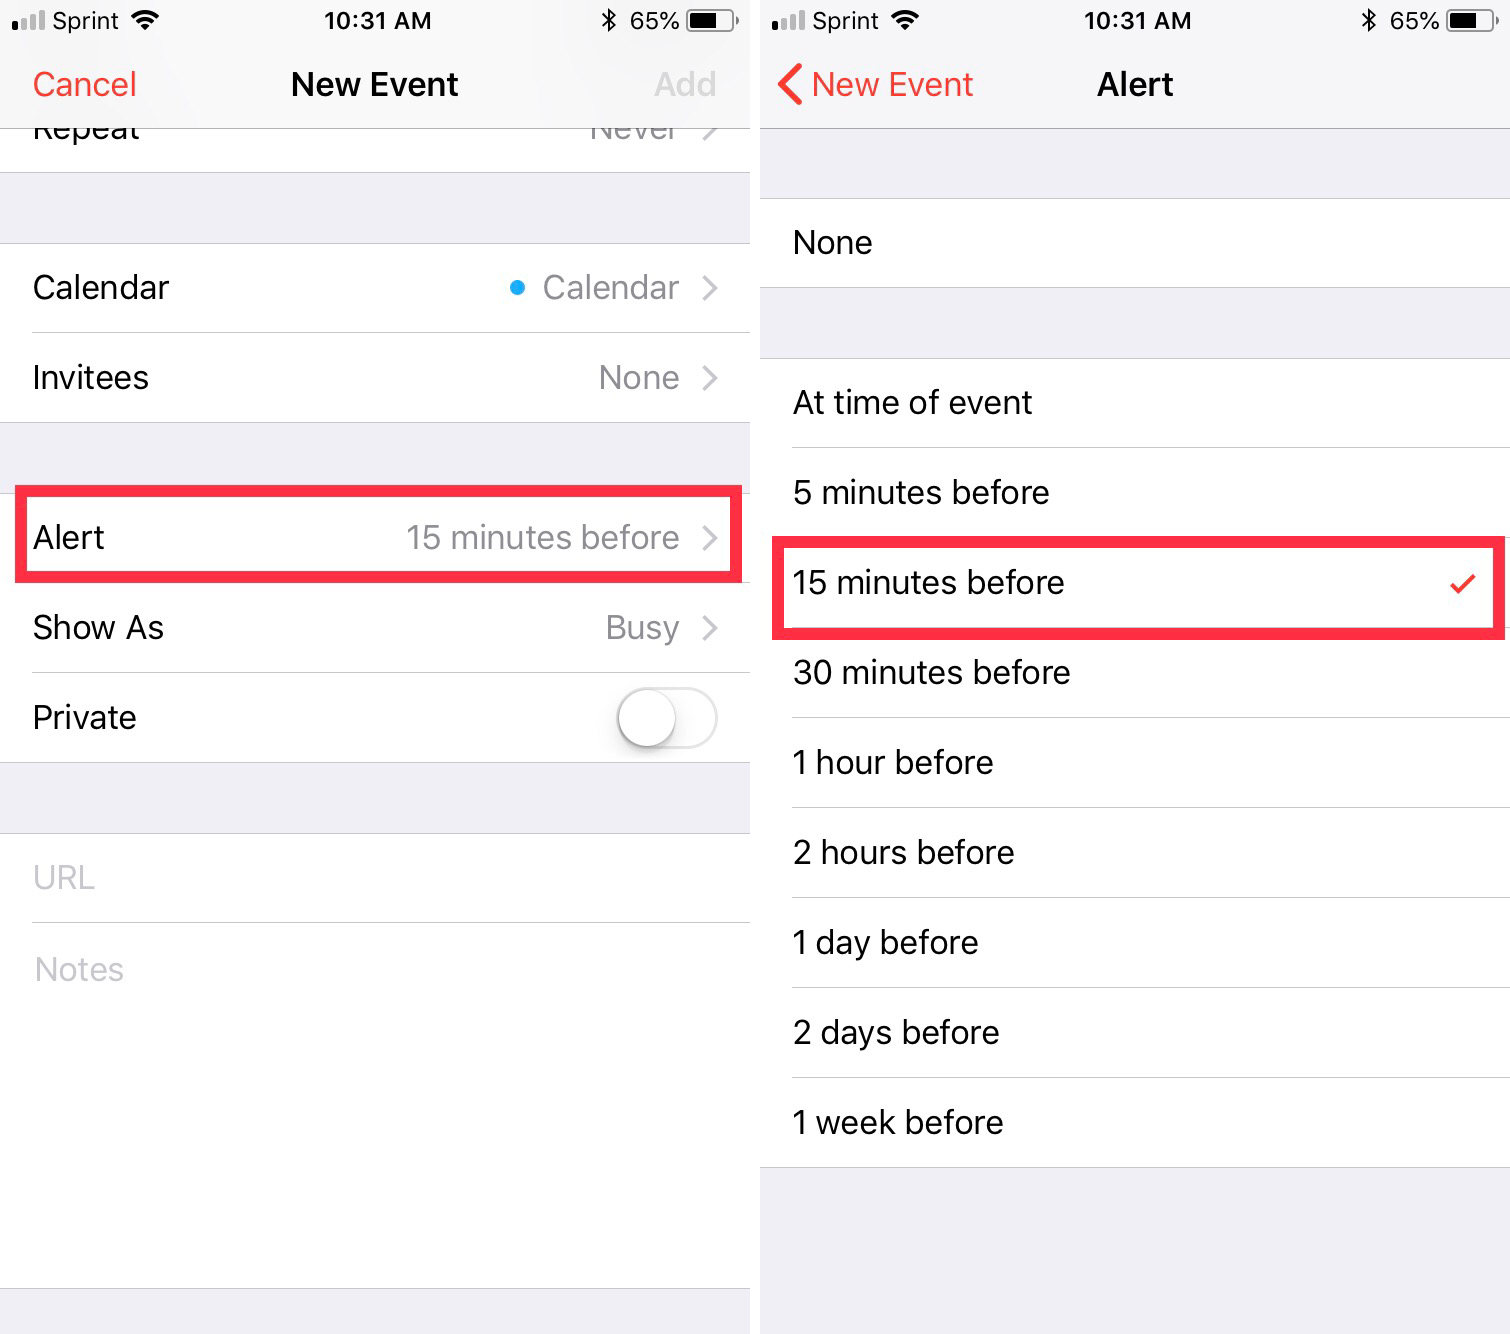 How to create iPhone Calendar default alert times for events